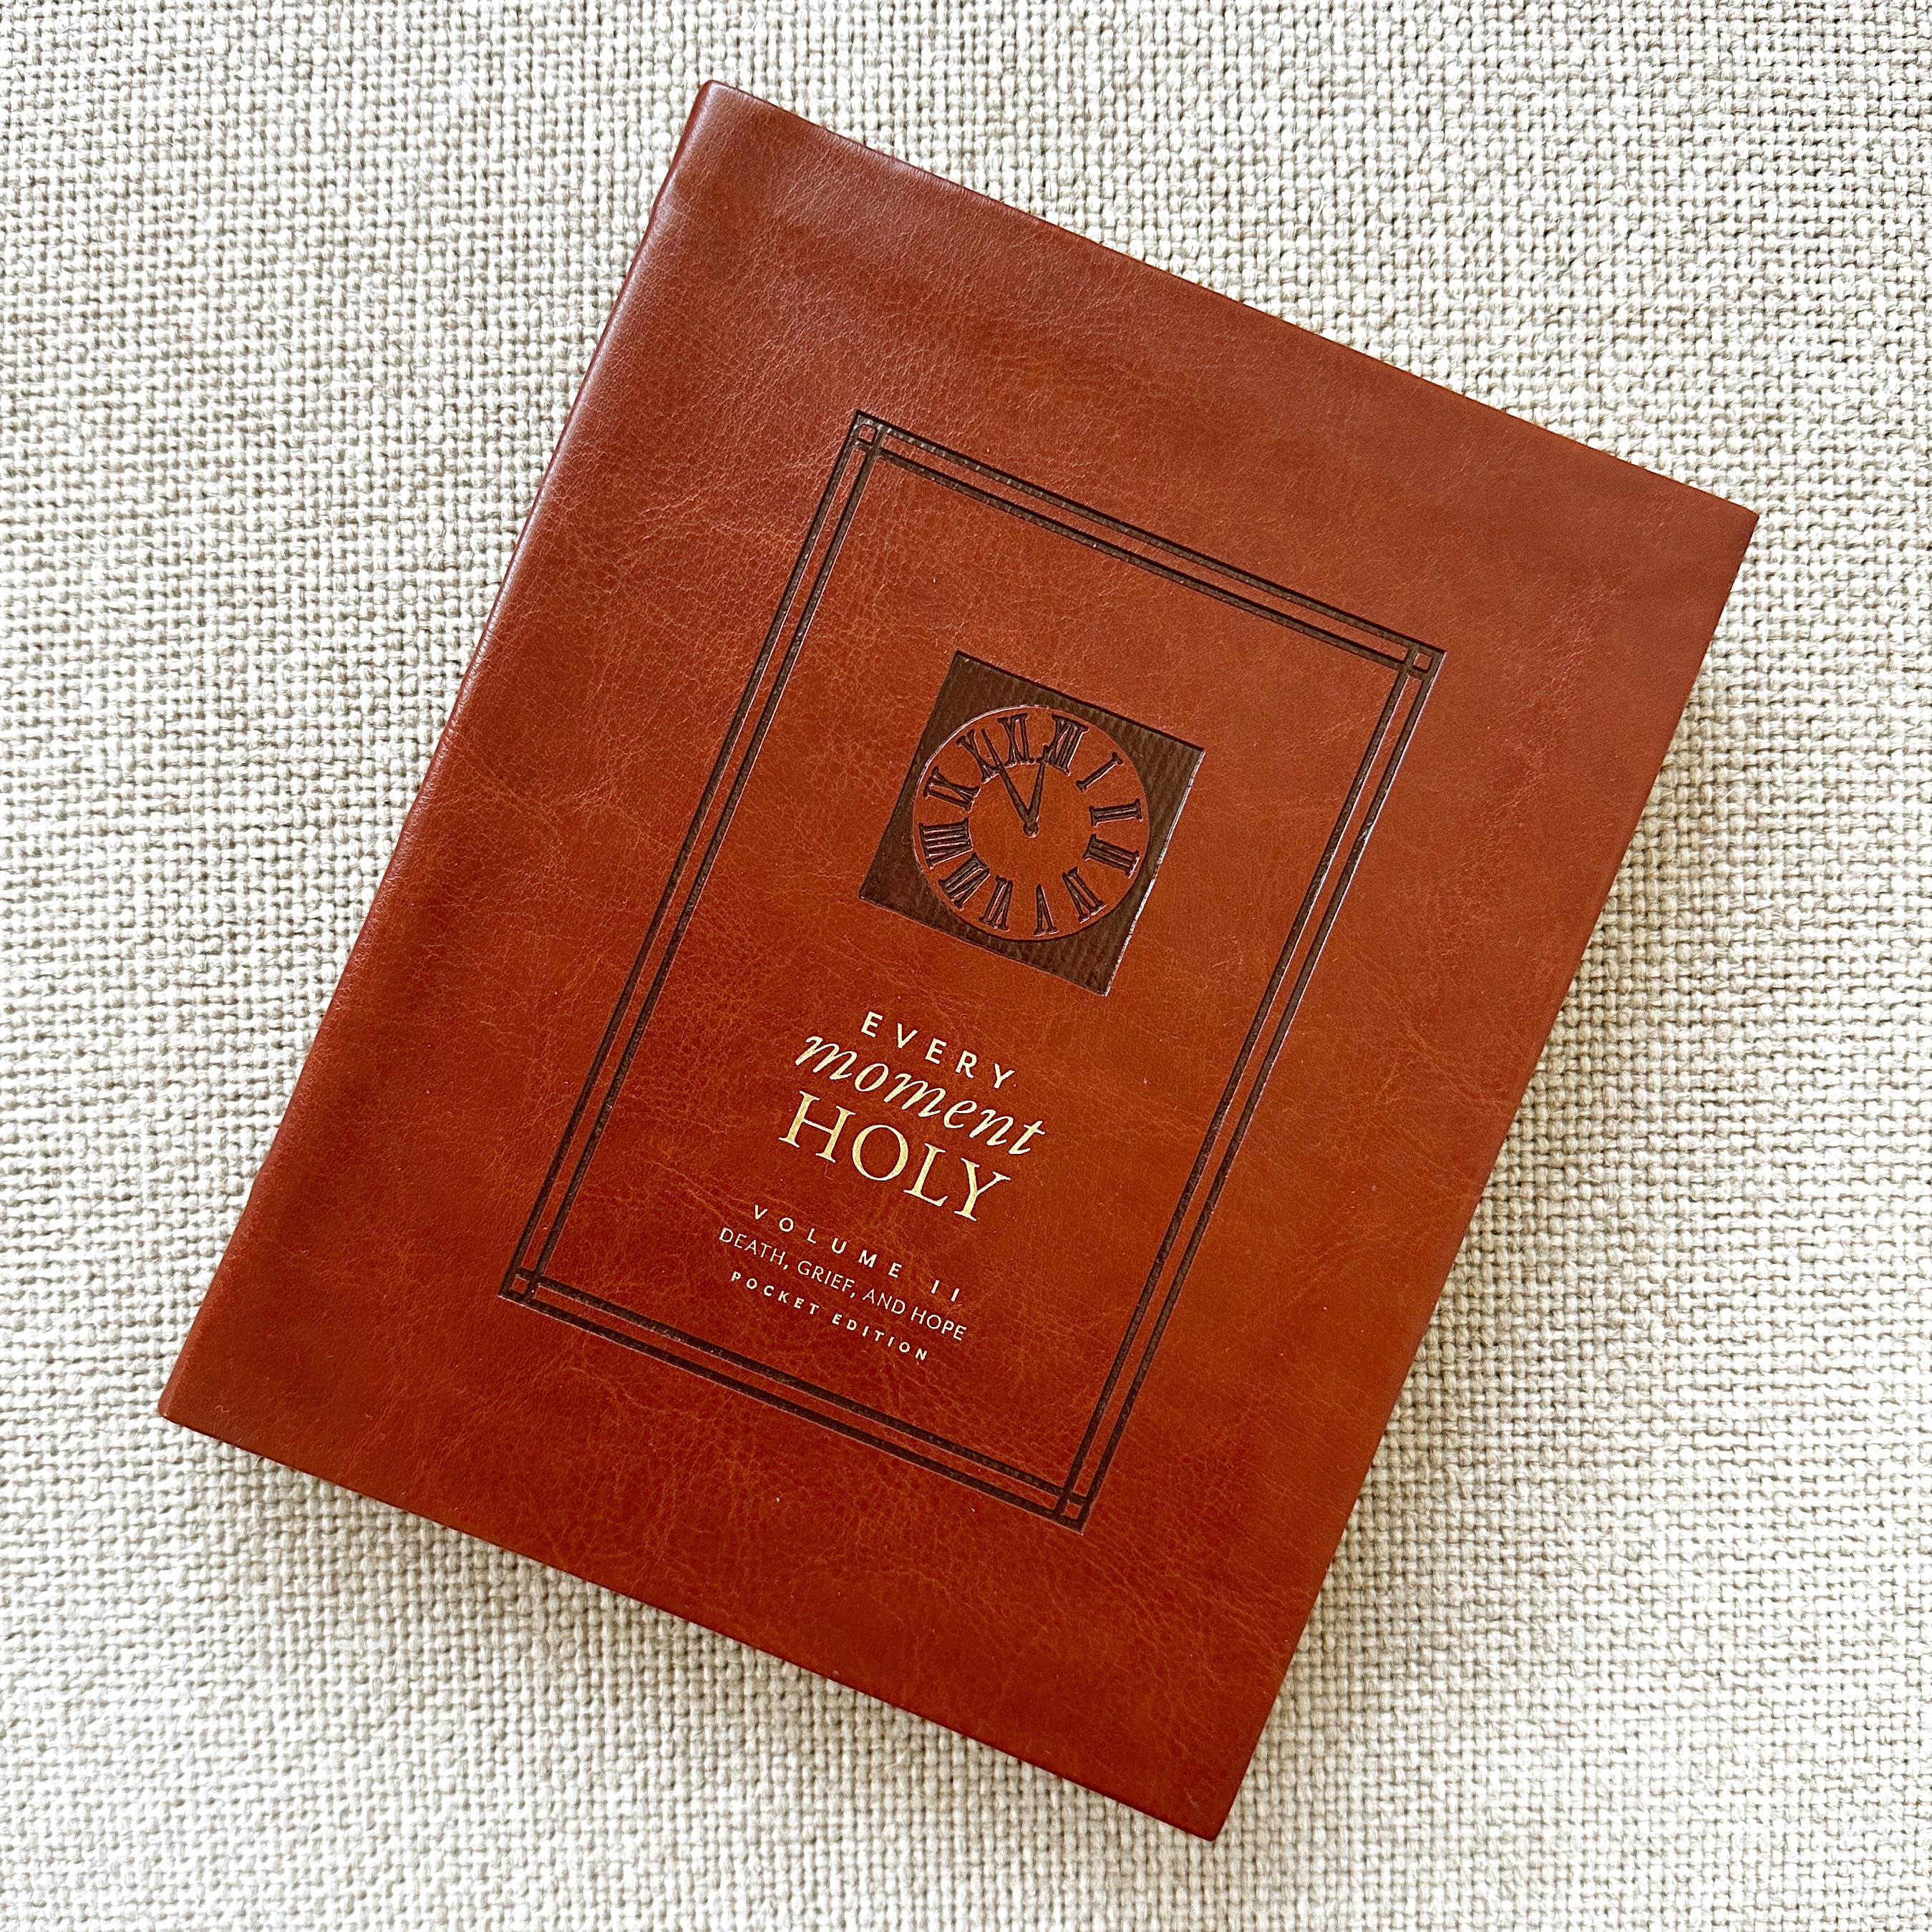 Book: Every Moment Holy, Volume II: Death, Grief, and Hope (Pocket Edition)